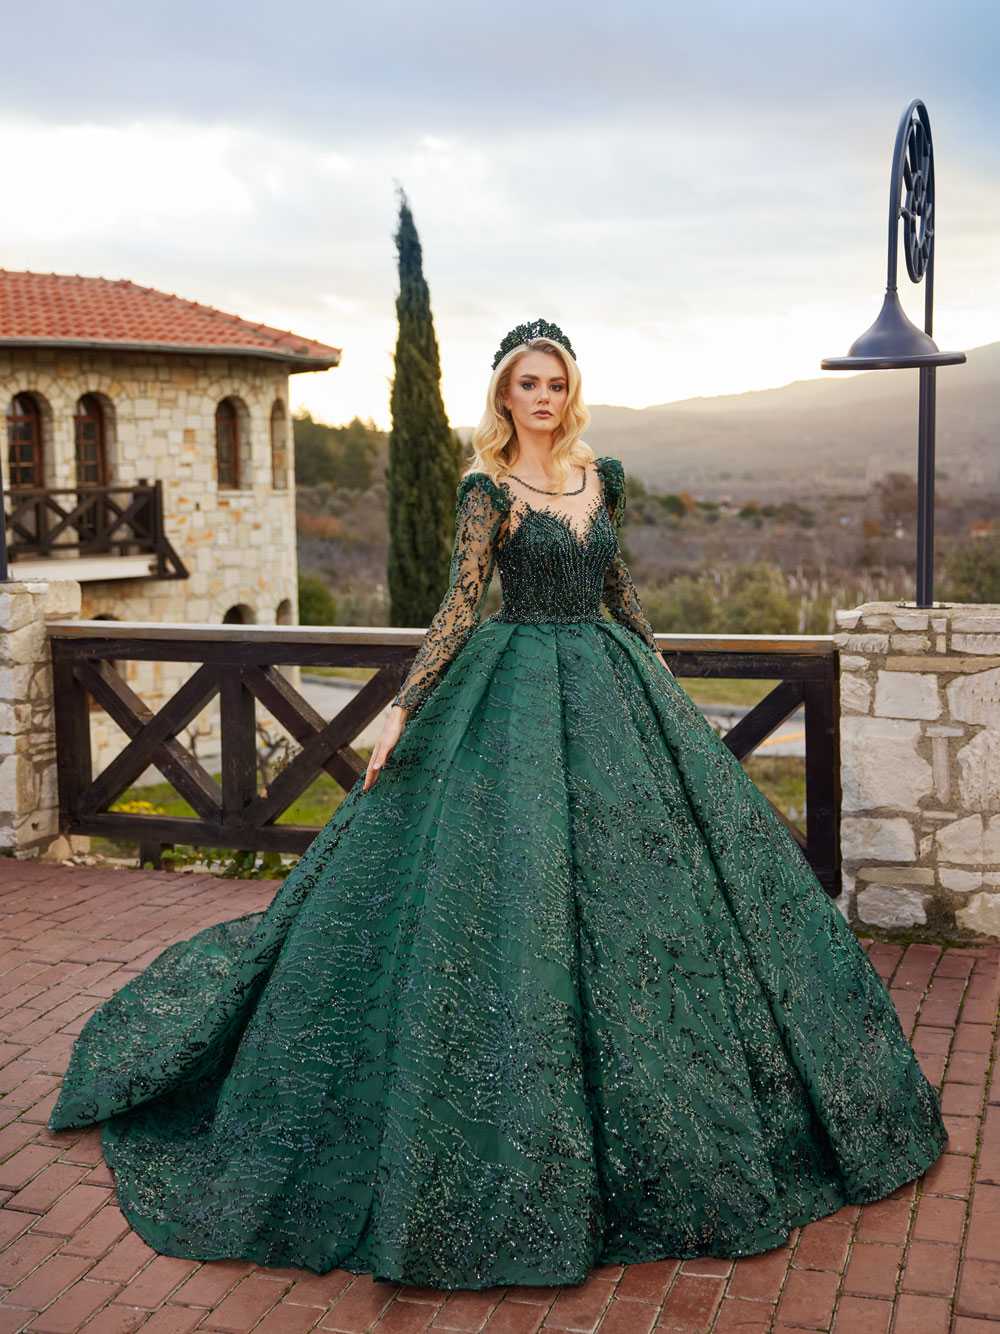 buy Emerald Green Lace Beaded Sweetheart Sequin Long Sleeve Ball Gown online wedding gowns shop